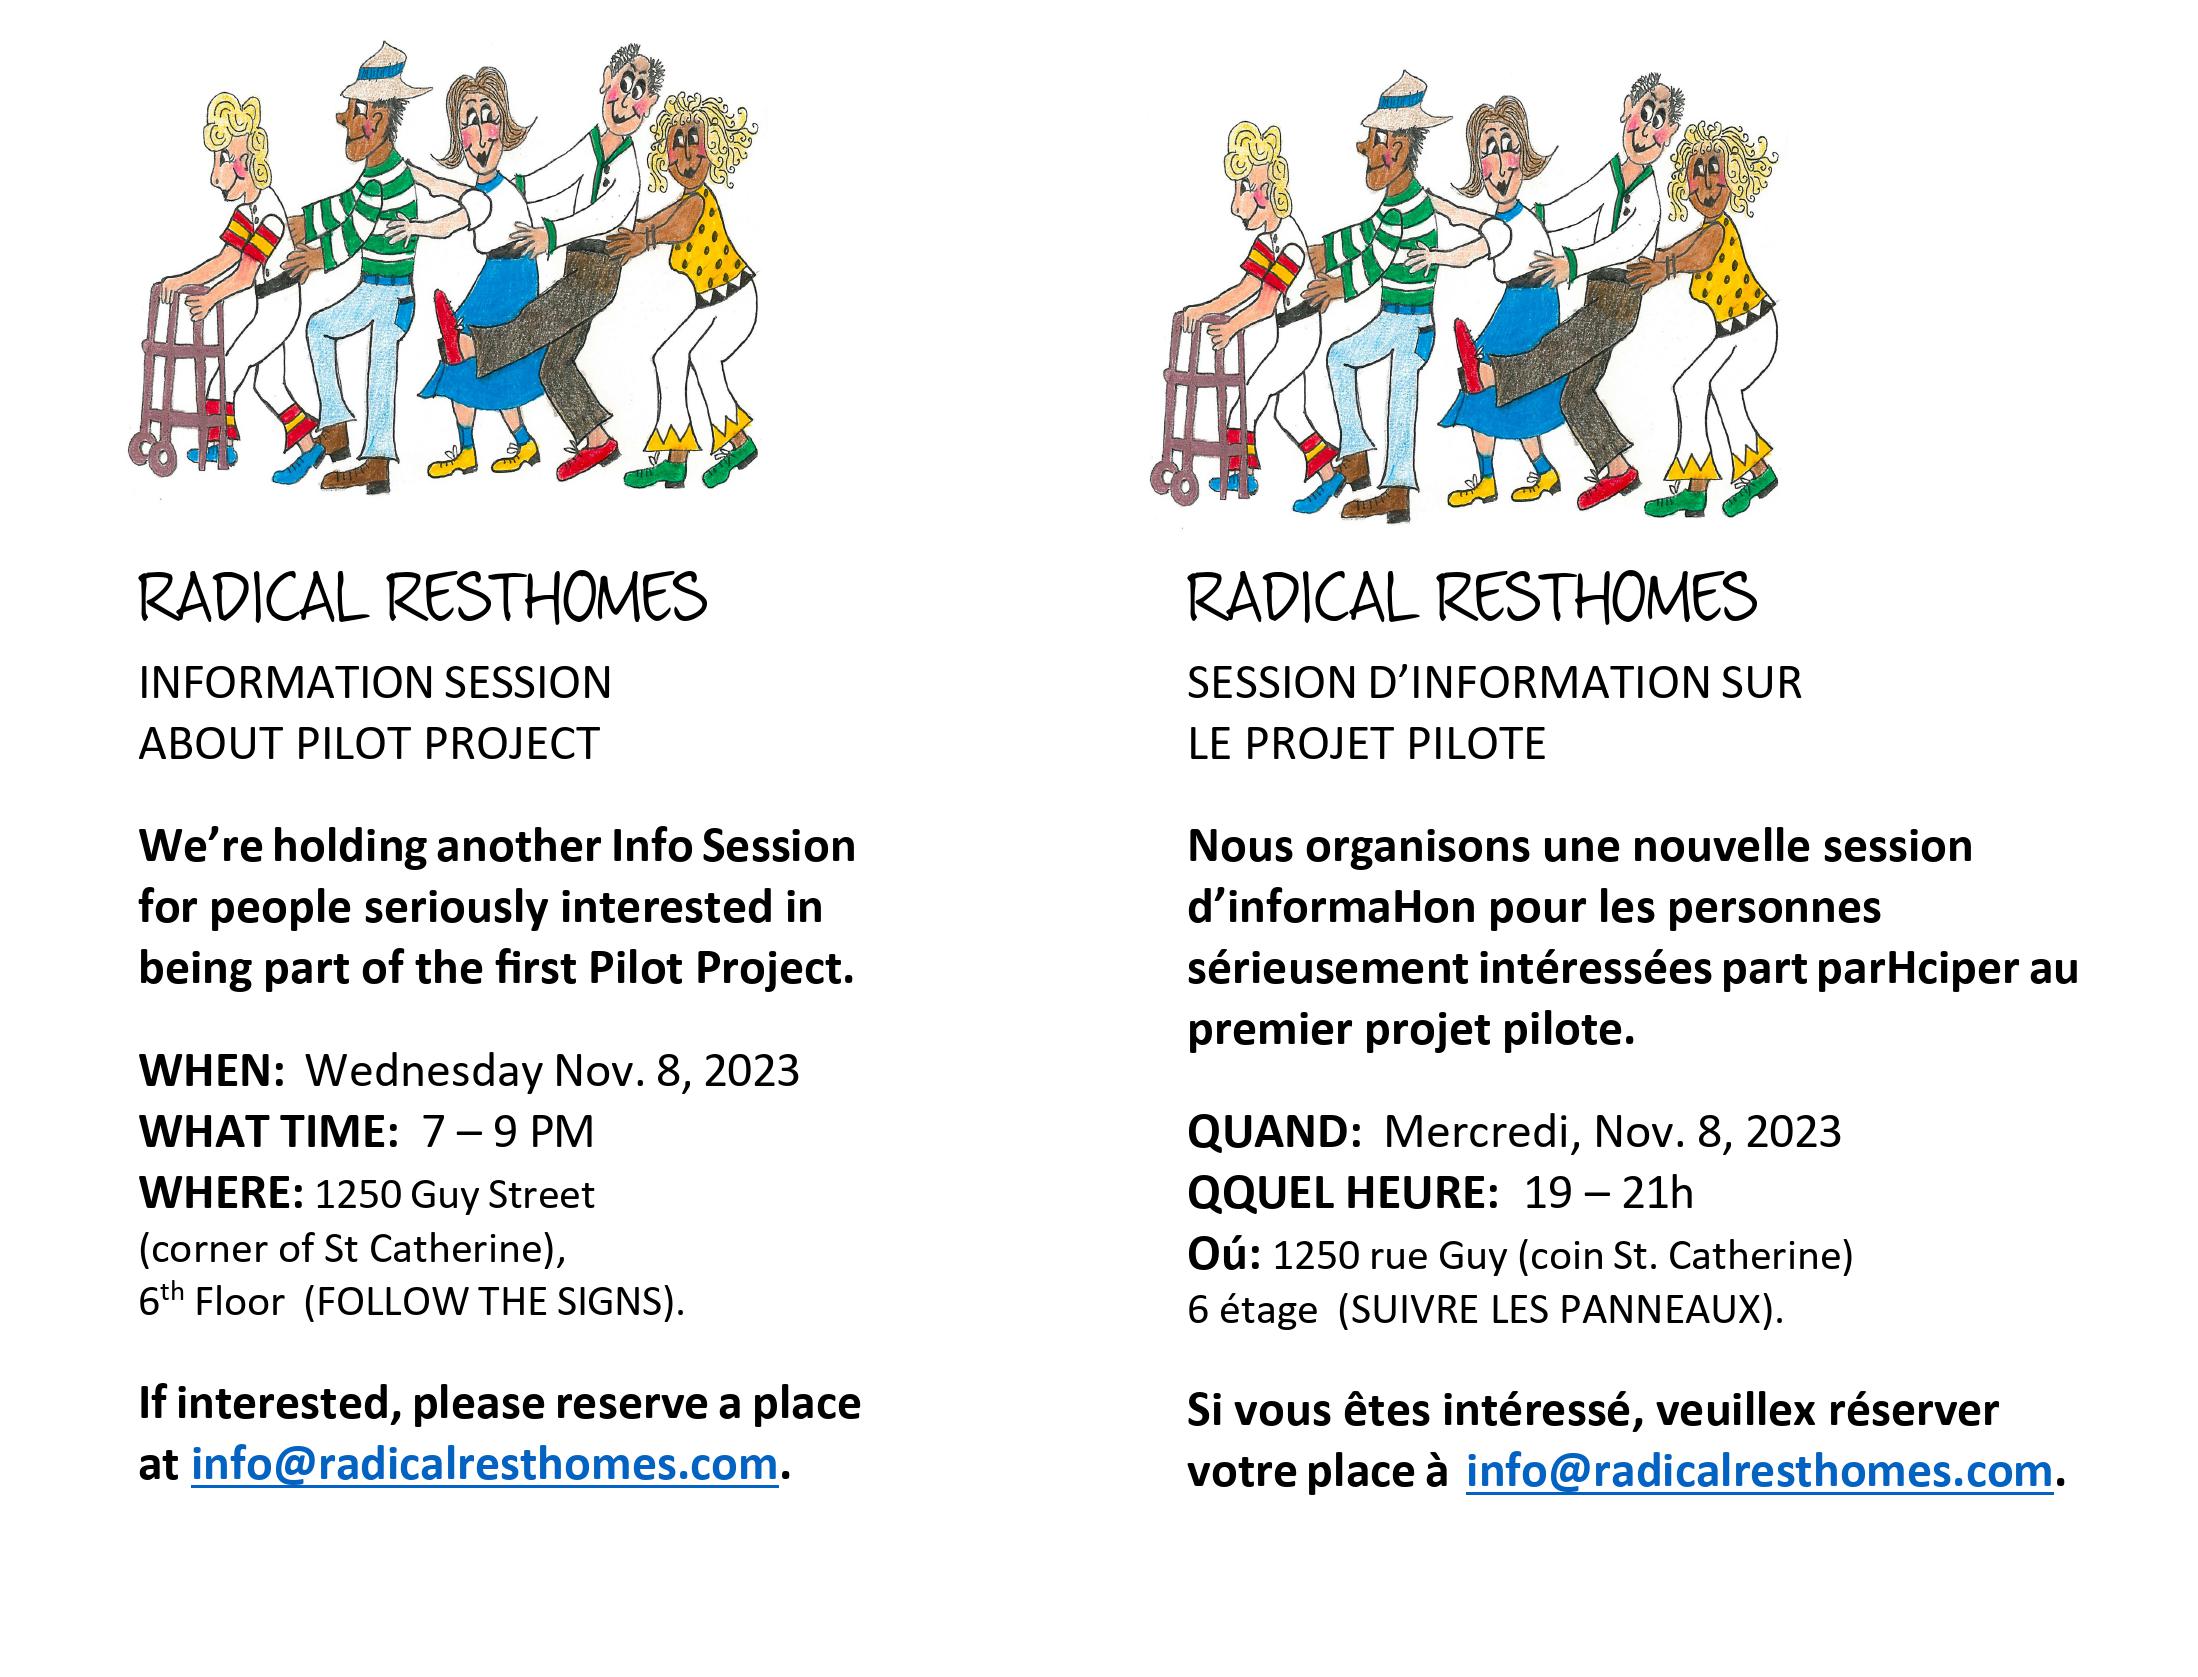 RADICAL RESTHOMES INFORMATION SESSION ABOUT PILOT PROJECT We're Holding another Info Session for people seriously interested in being part of the first Pilot Project. WHEN: Wednesday, November 8, 2023 WHAT TIME: 7-9pm WHERE: 1250 Guy Street (corner of St Catherine), 6th floor (follow the signs). IF INTERESTED, PLEASE RESERVE A PLACE AT info@radicalresthomes.com